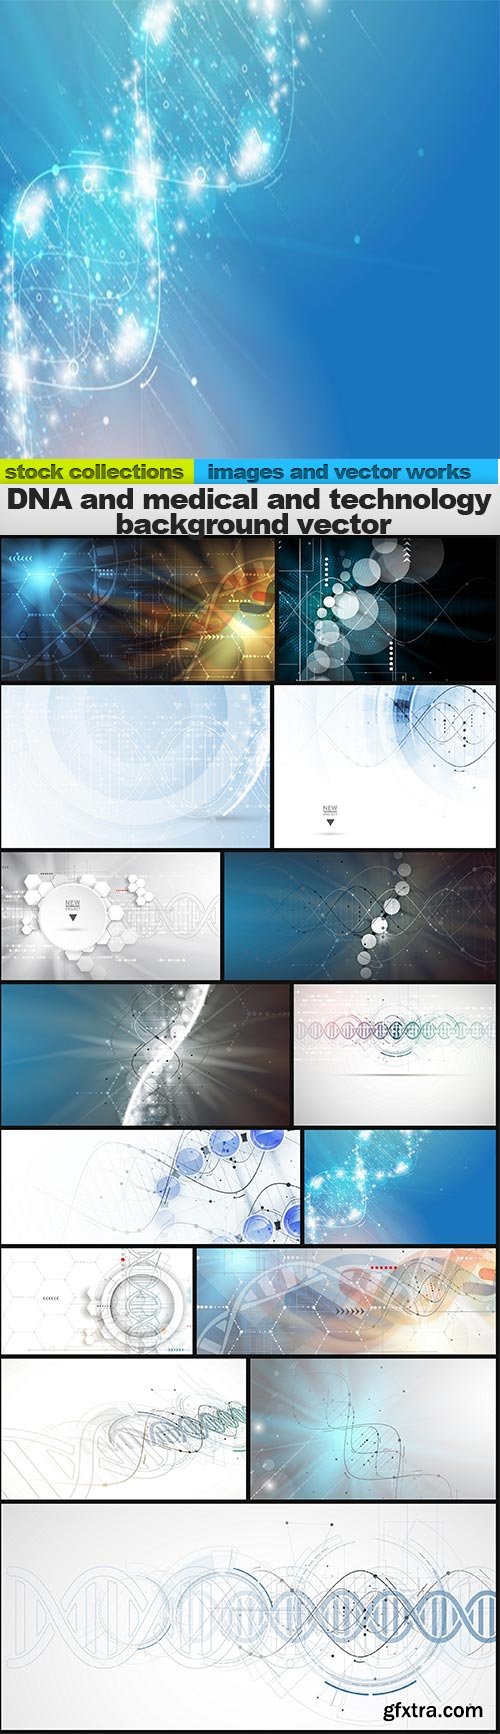 DNA and medical and technology background vector, 15 x EPS